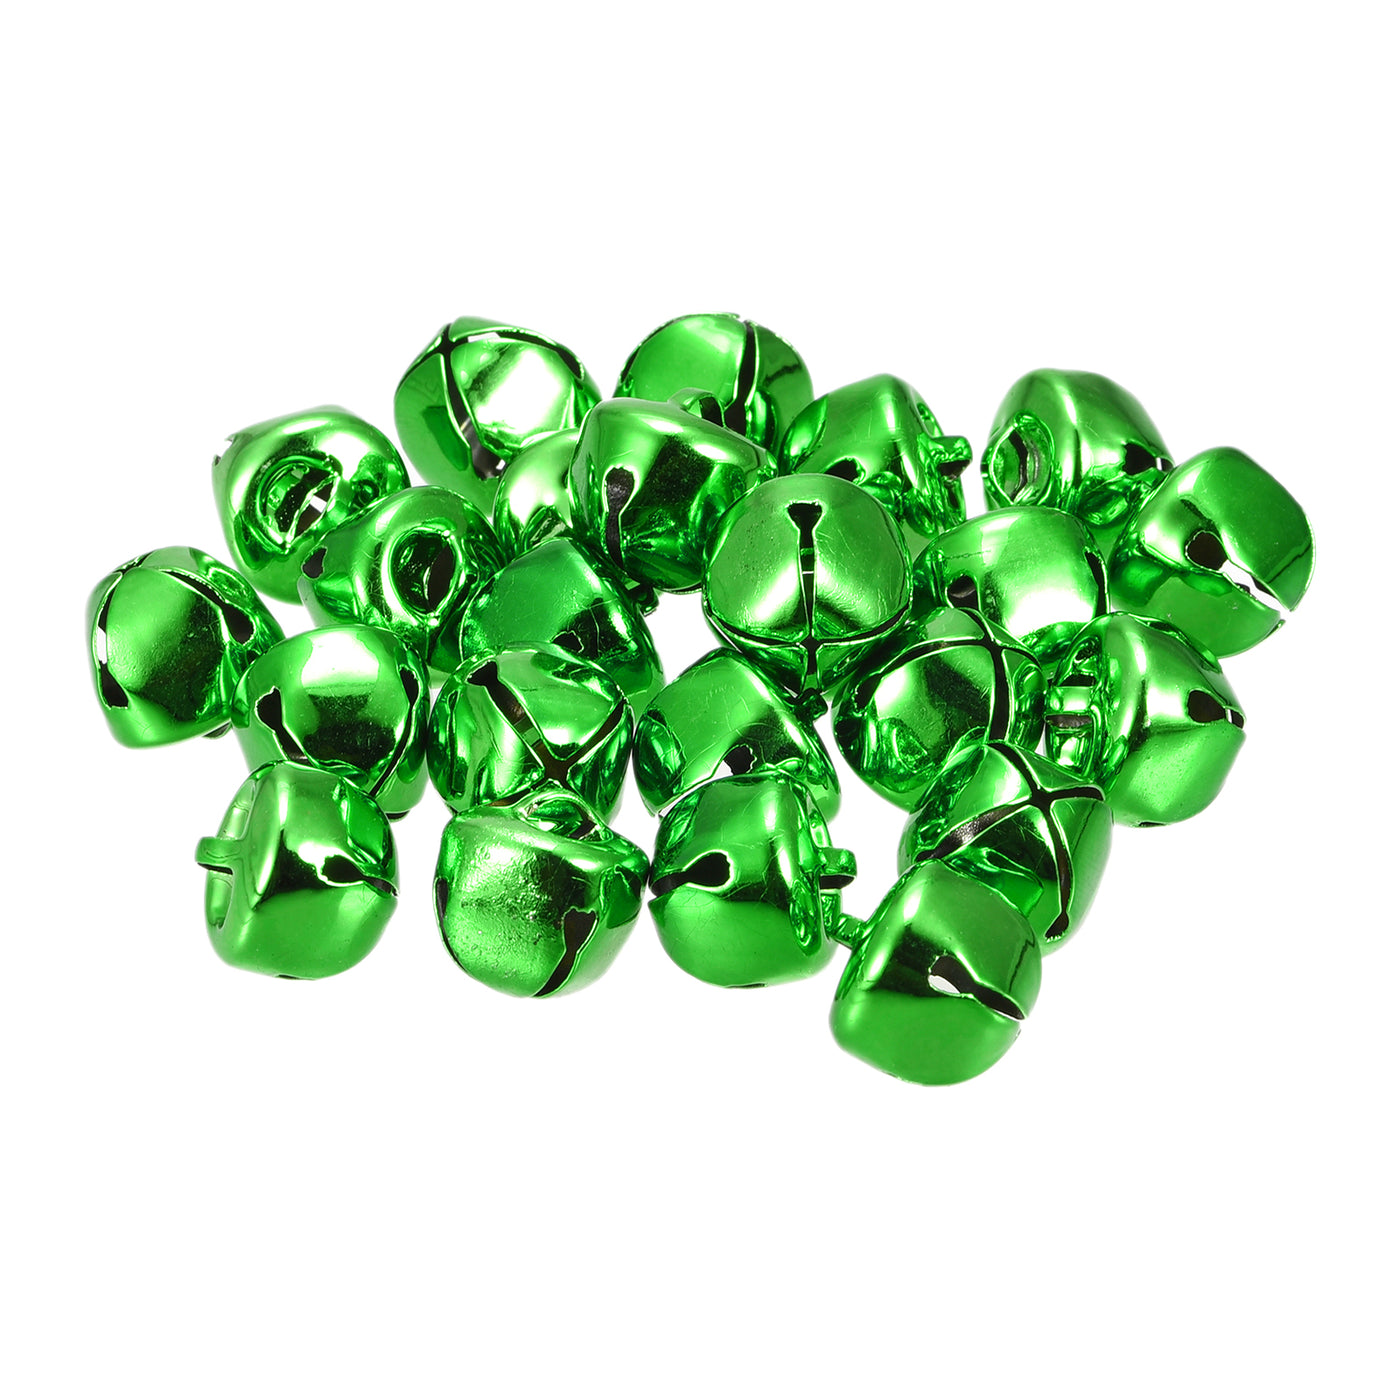 uxcell Uxcell Jingle Bells, 12mm 48pcs Small Bells for Crafts DIY Christmas, Green